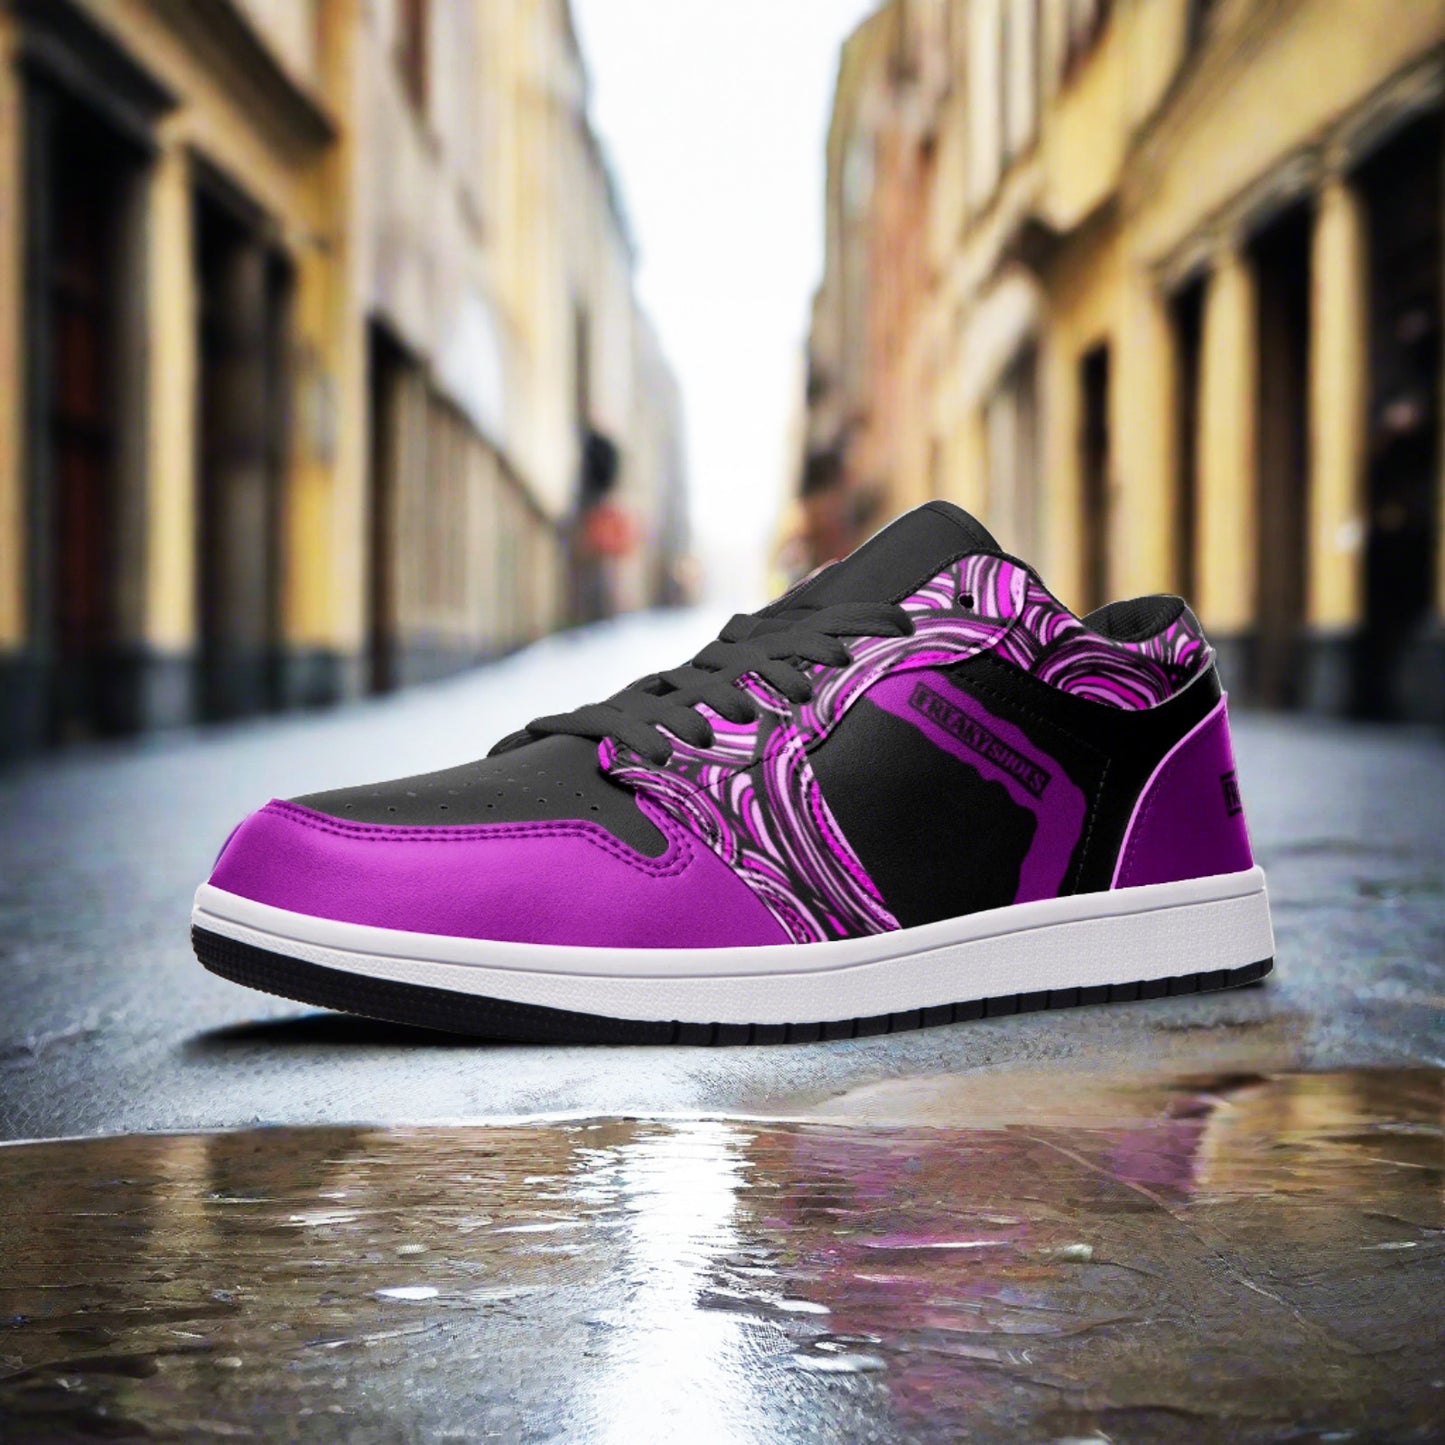 Freaky Shoes® Black and Purple Unisex Low Top Leather Sneakers